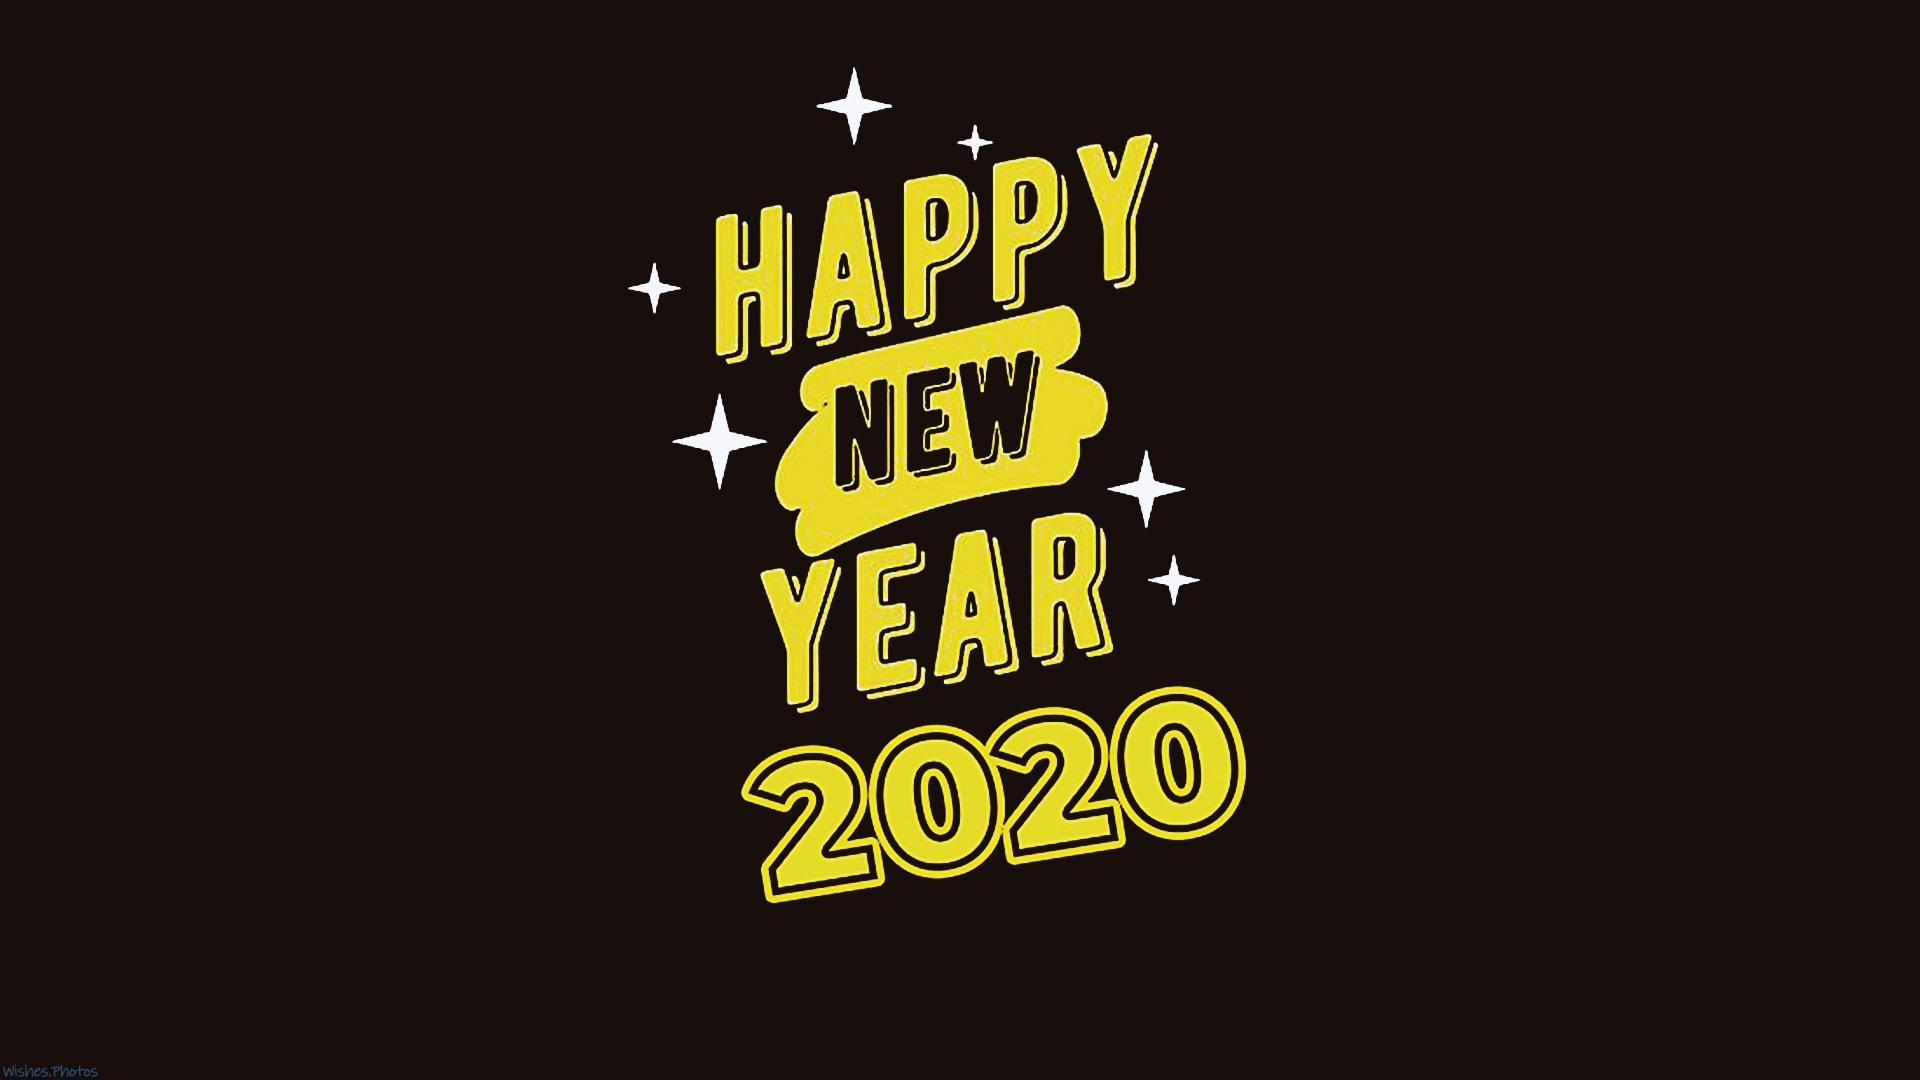 happy new year wallpaper,font,text,yellow,logo,graphic design